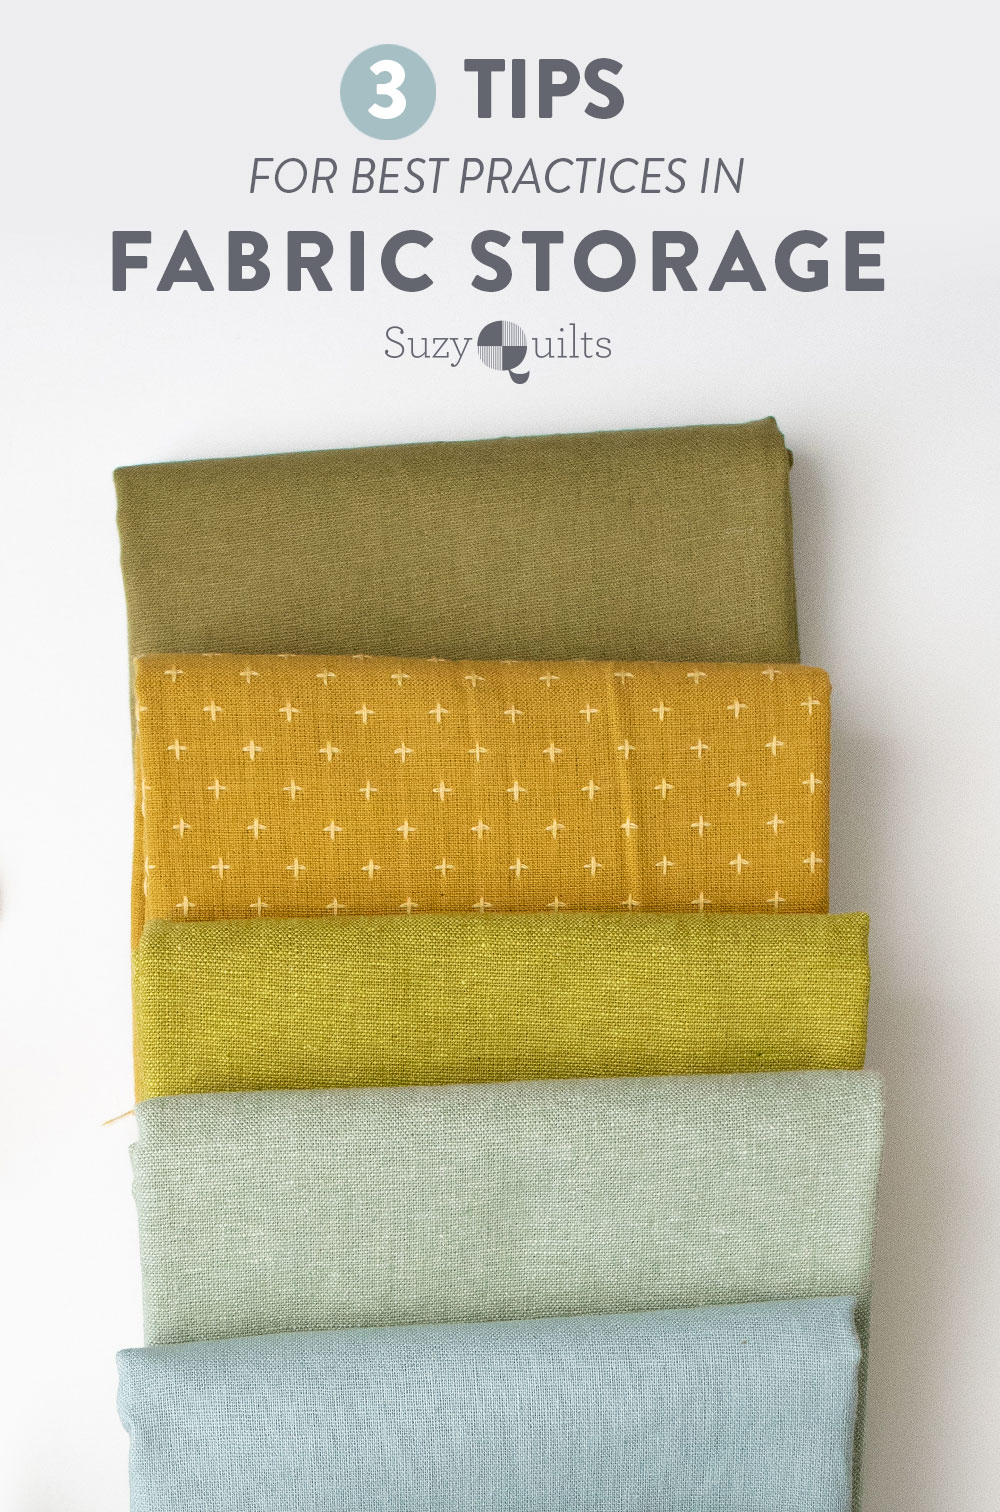 3 tips you need to know about best practices for fabric storage to prevent damage to your quilt fabric stash. Follow these simple steps to keep your quilt fabrics looking brand new! suzyquilts.com #quilting #fabric